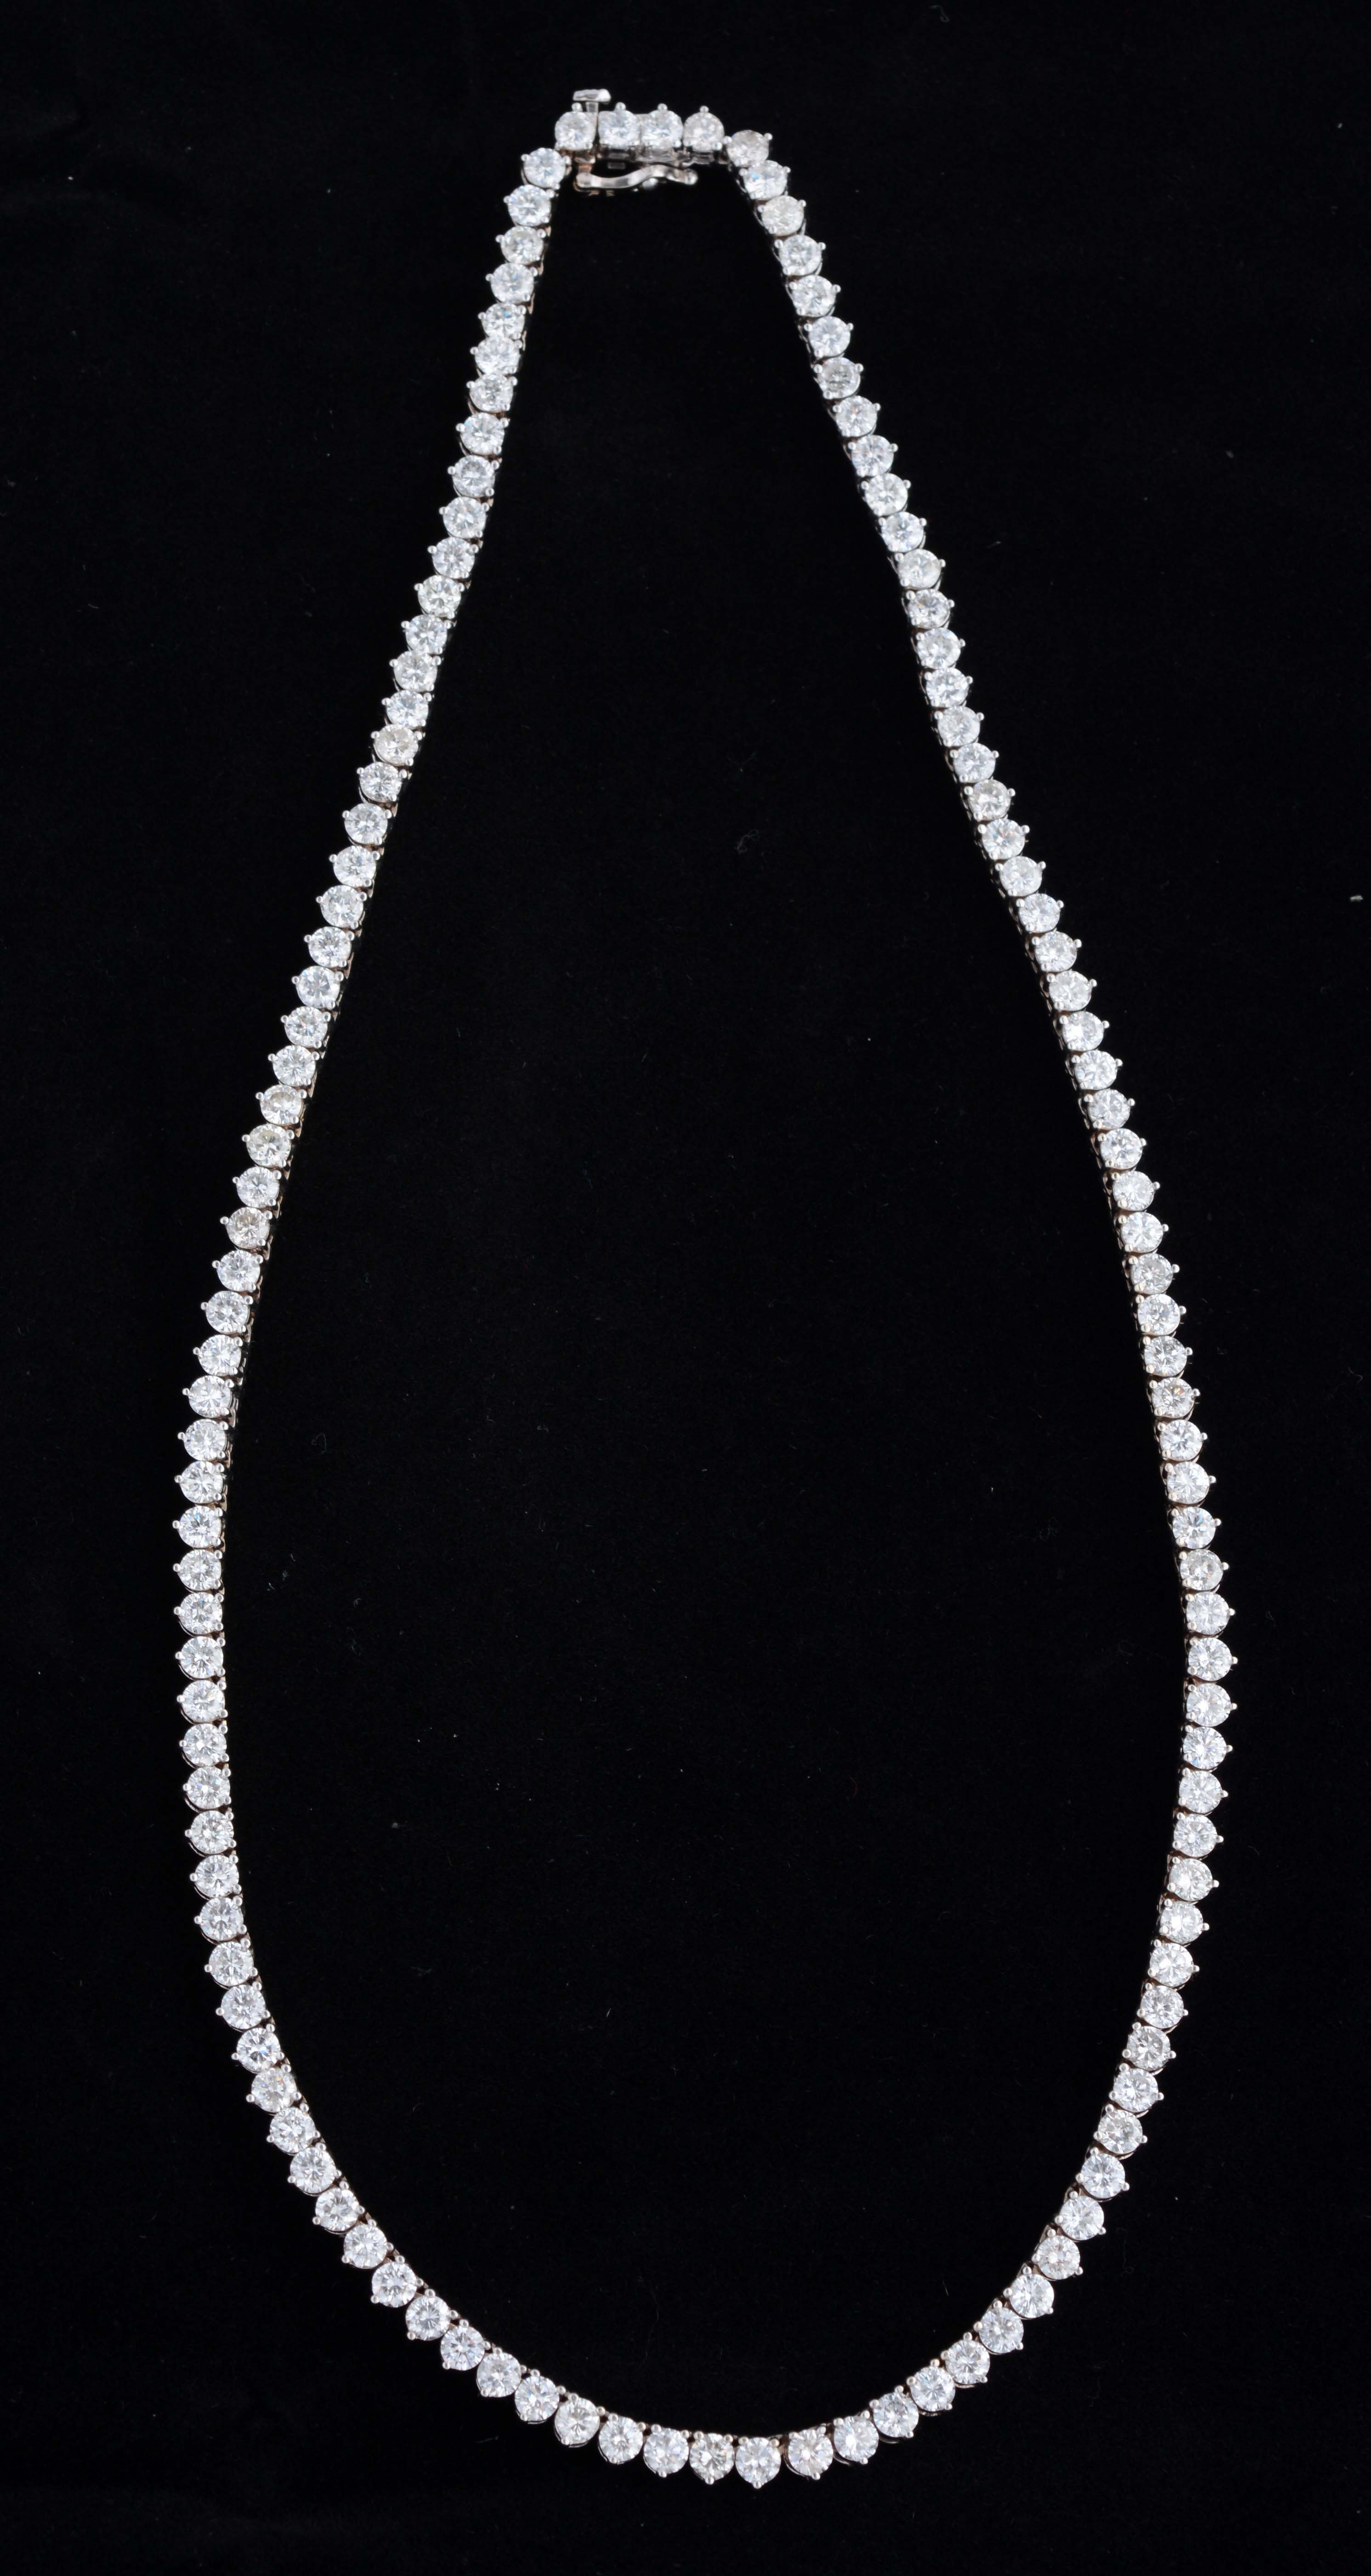 14K White Gold and Diamond Necklace, estimated at $12,000-20,000.